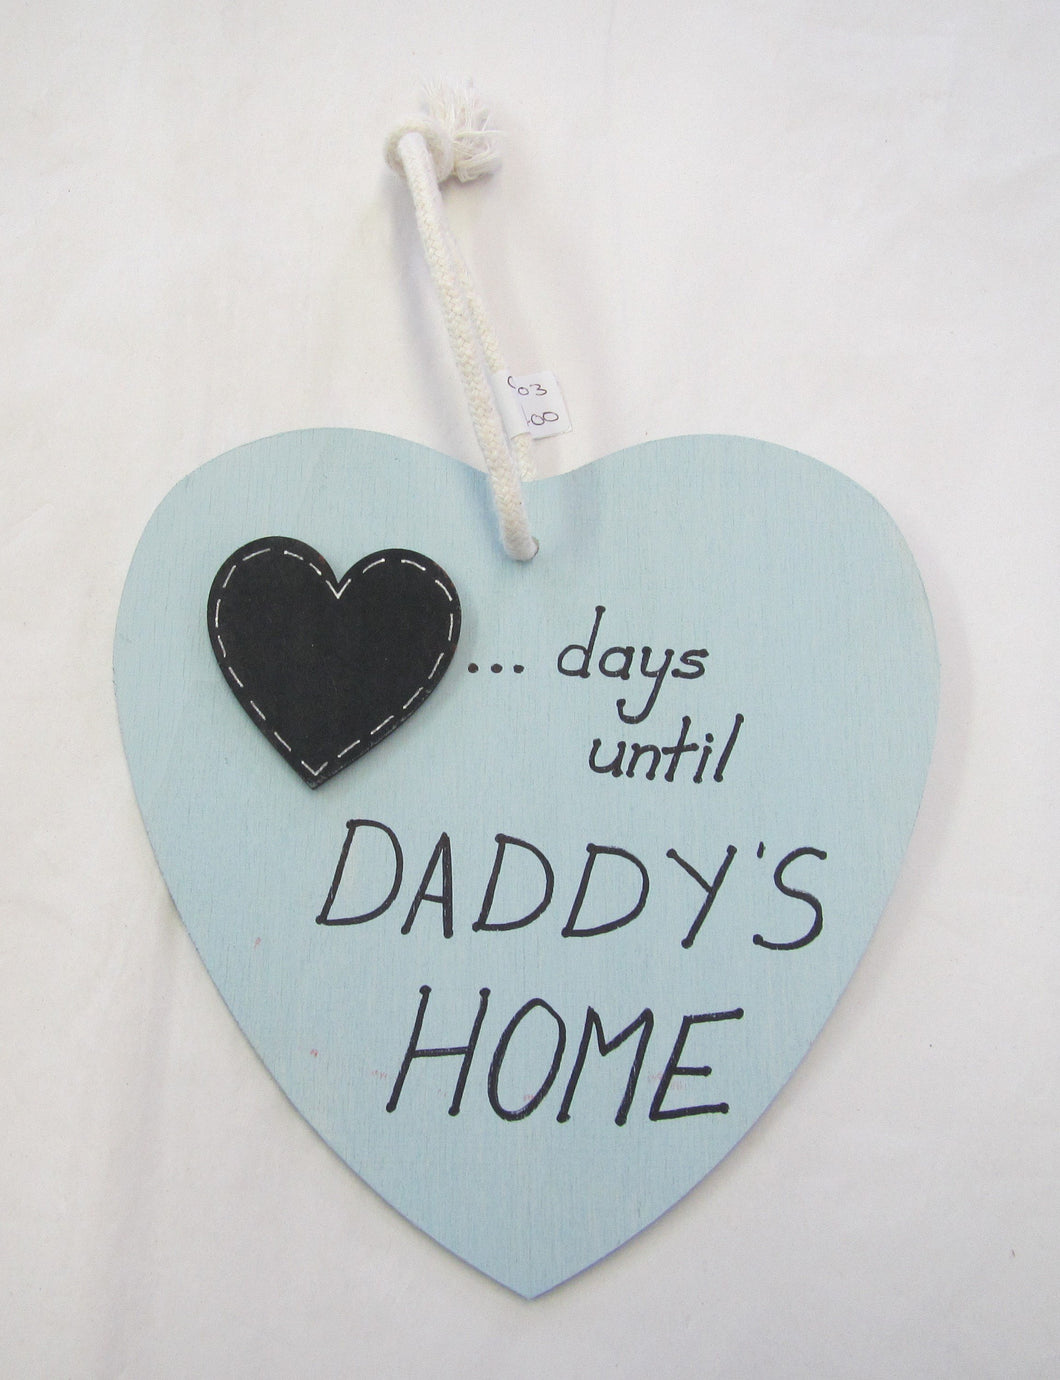 Beautiful handcrafted heart - days until daddy's home